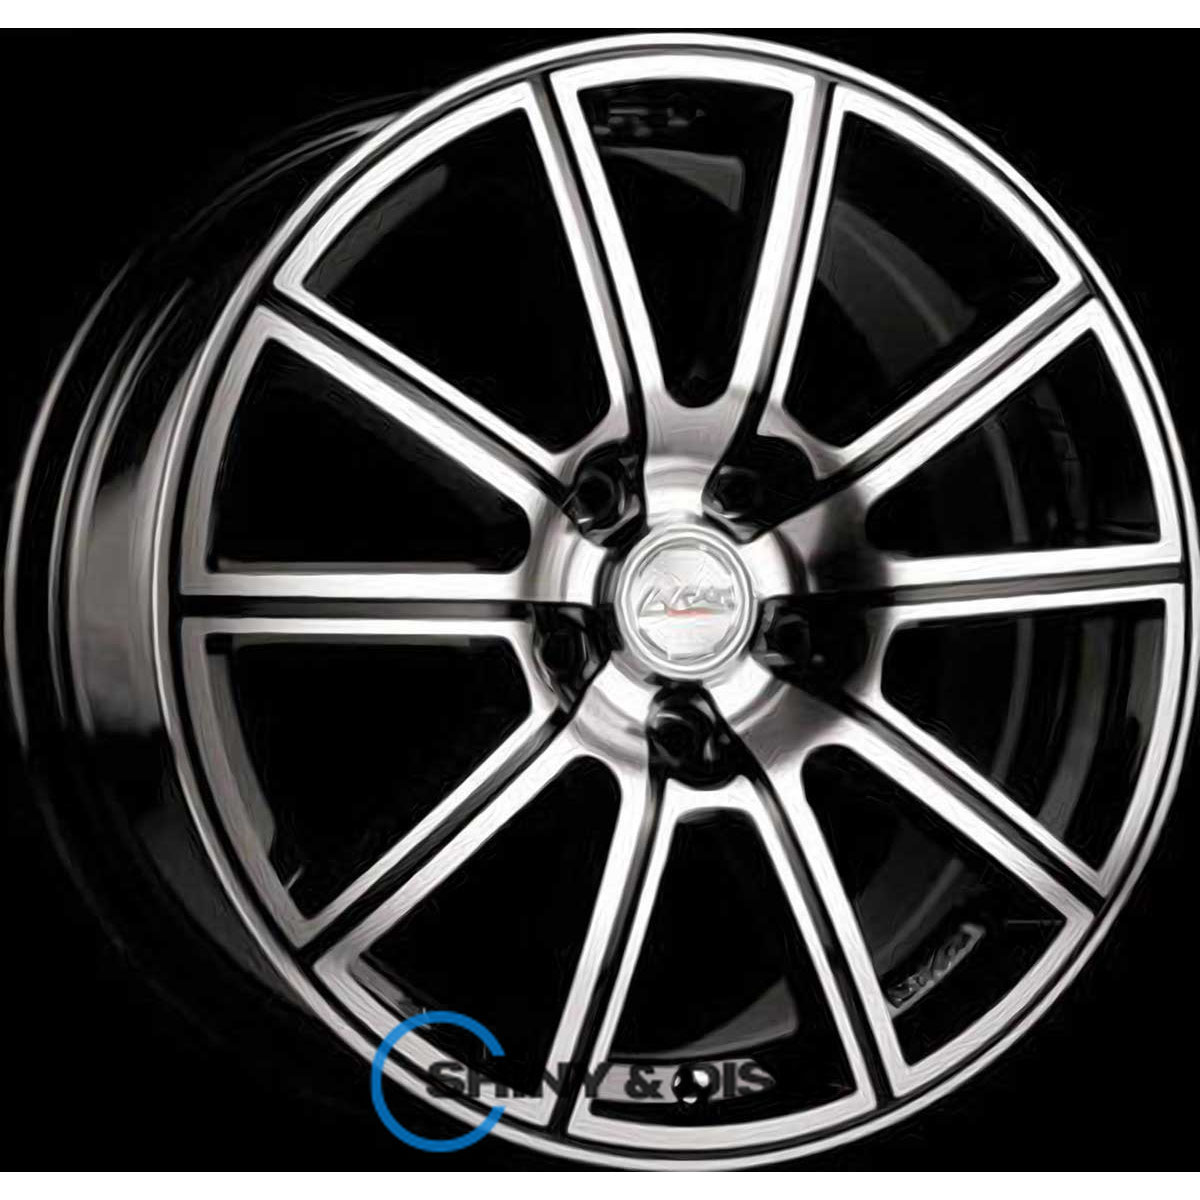 rs tuning h-423 bkfp r15 w6.5 pcd5x114.3 et40 dia67.1